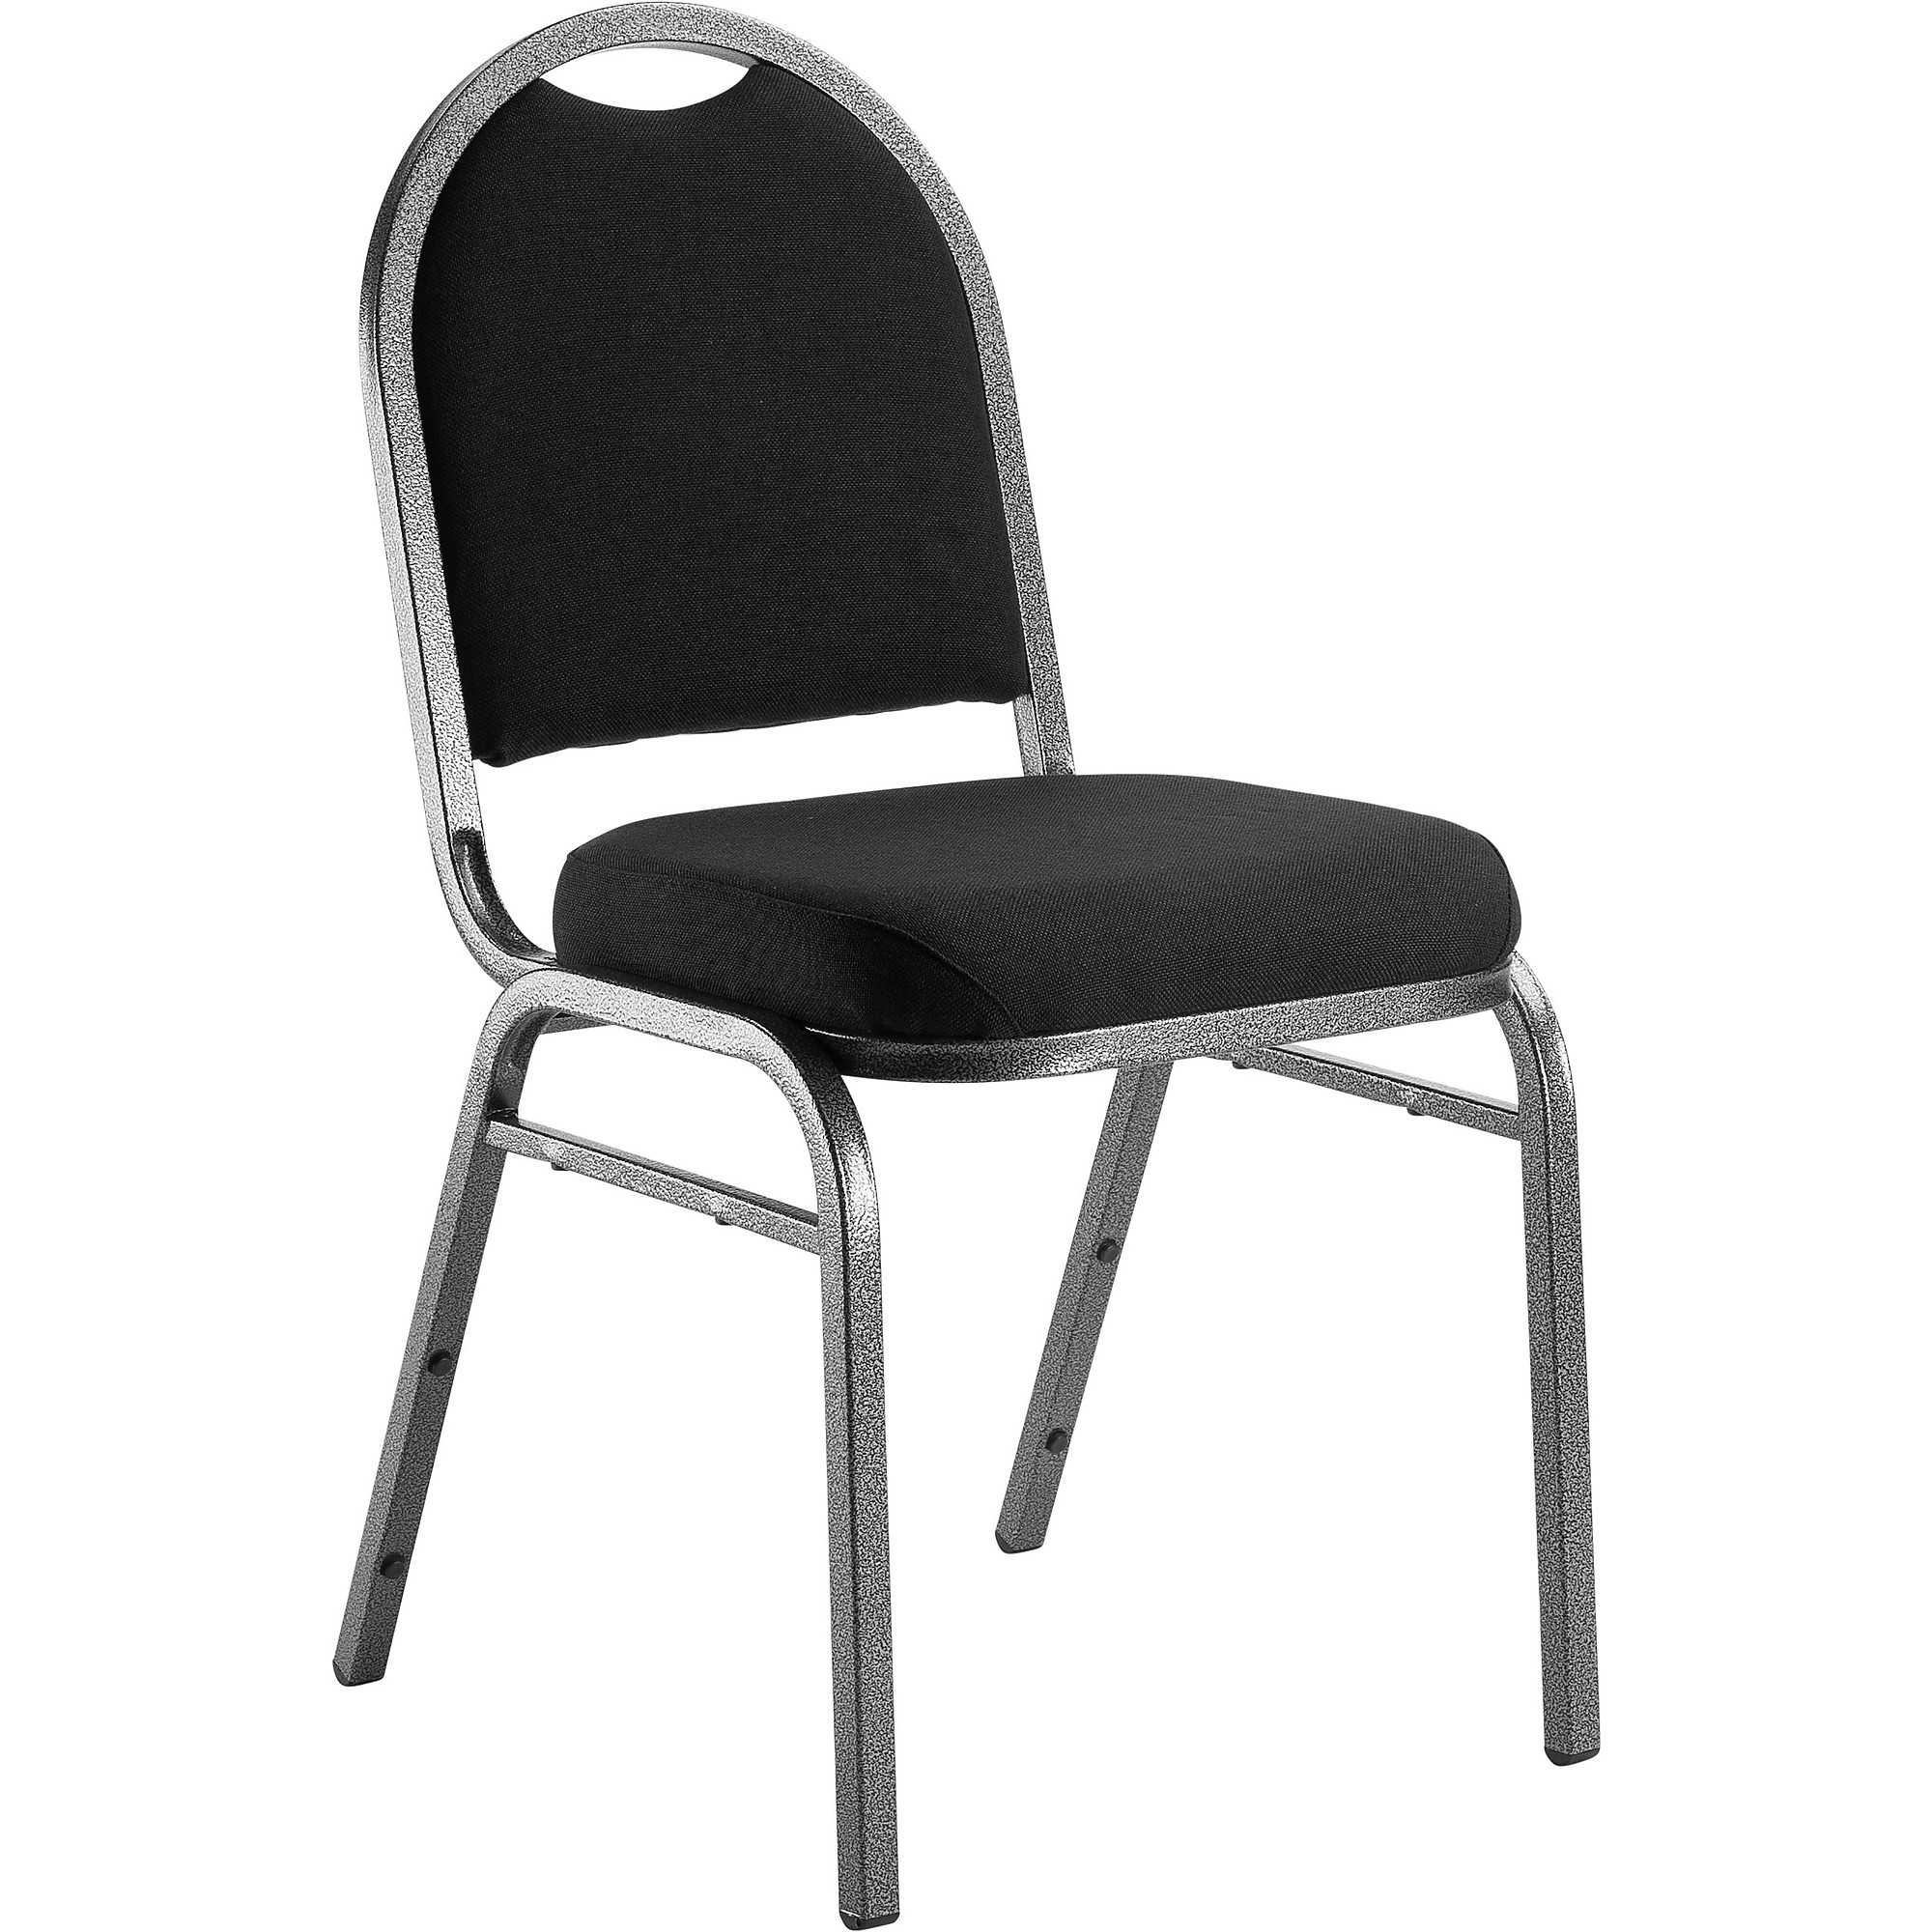 National Public Seating, 9200 Series Fabric Stack Chair, Primary Color Black, Included (qty.) 1, Seating Type Dining Chair, Model 9260-SV